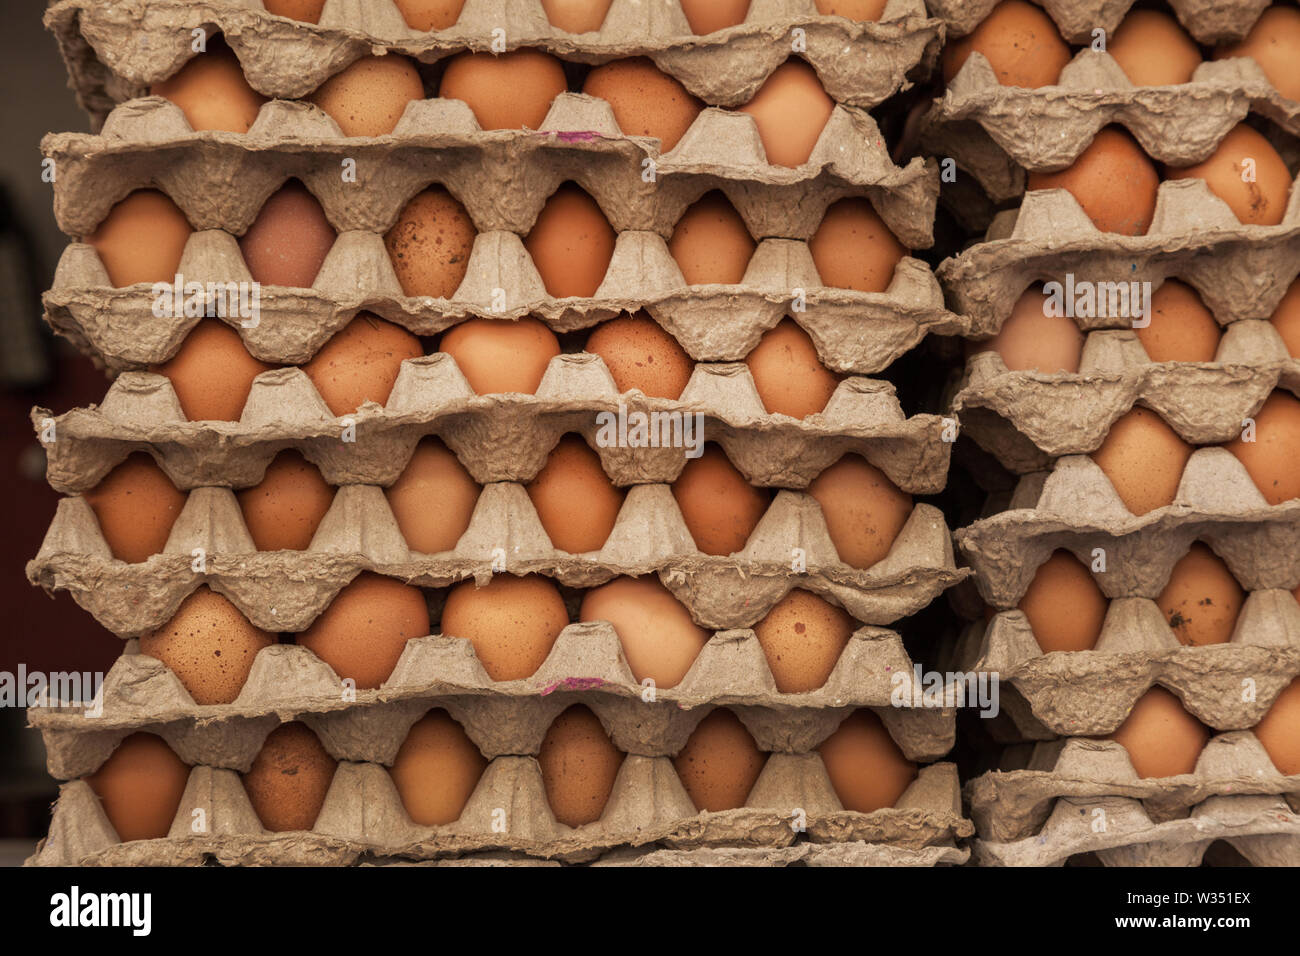 Tray of eggs stacked in a shop in Kathmandu Stock Photo